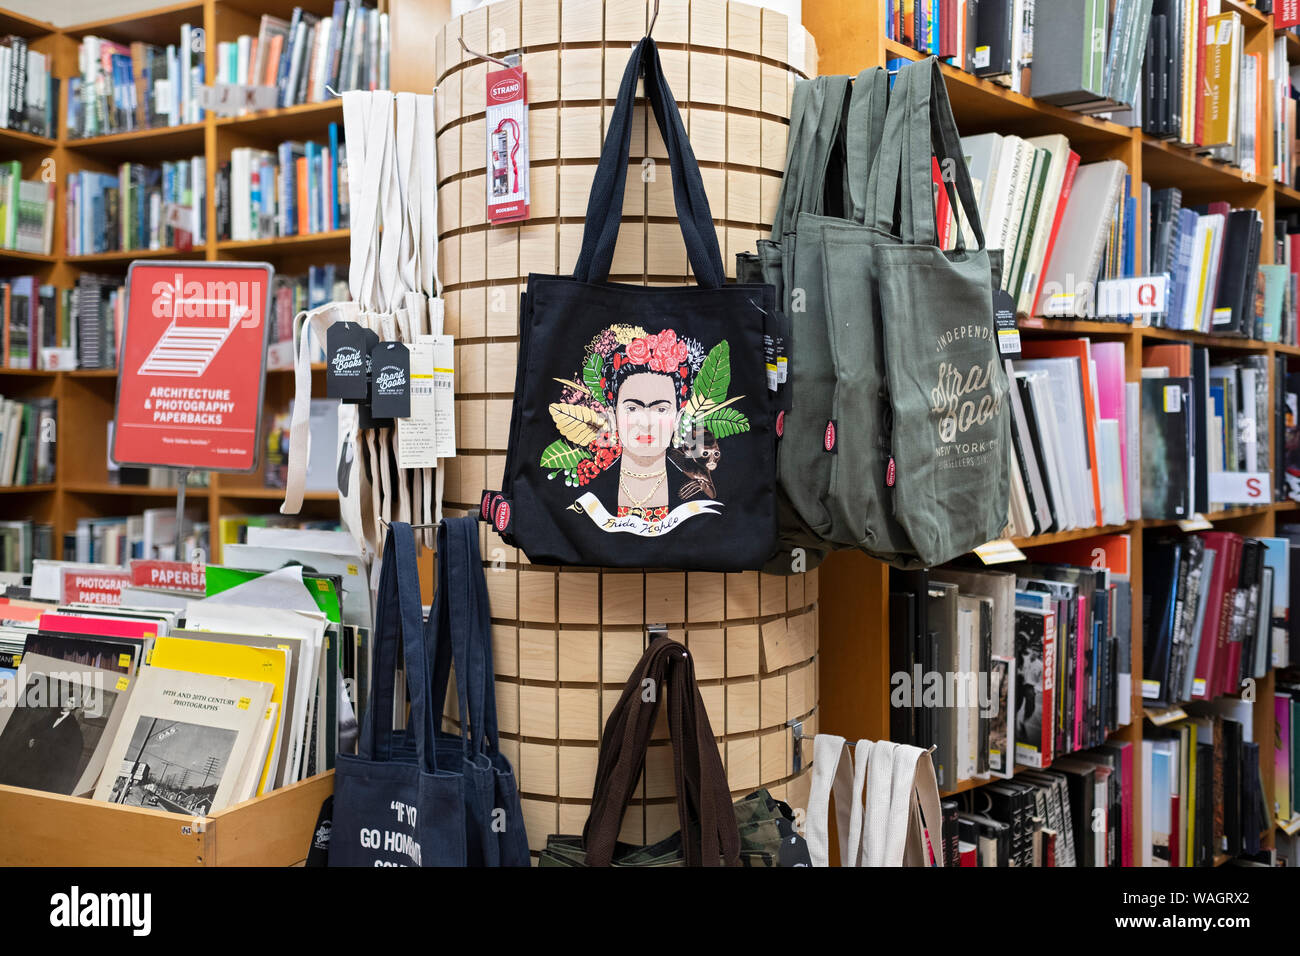 FRIDA KAHLO TOTE BAG for sale at the Strand Book Store in Greenwich Village, Manhattan, New York City. Stock Photo